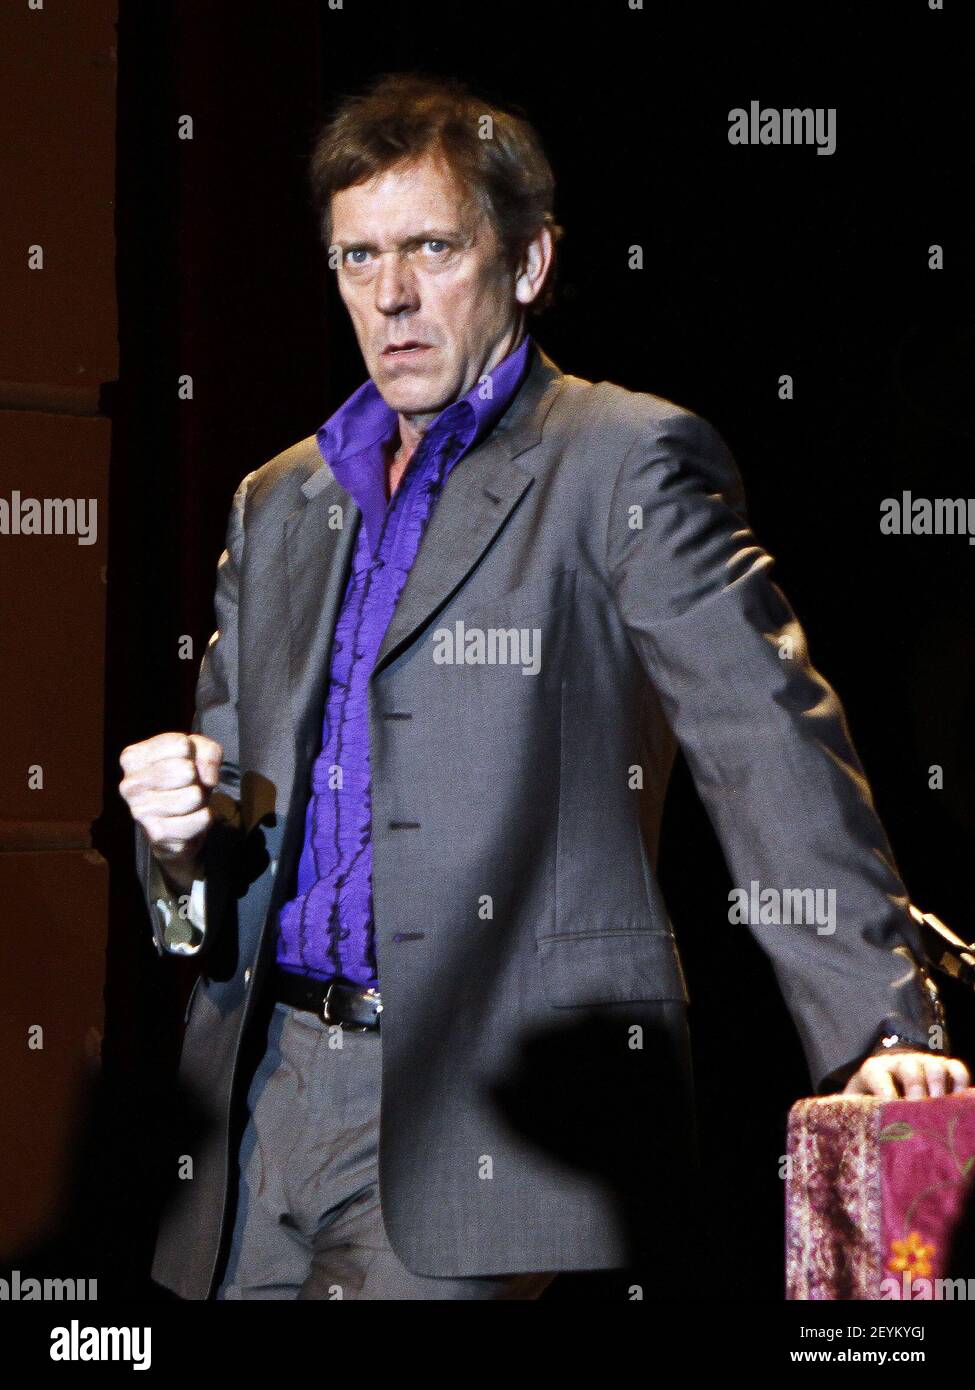 Actor, pianist, singer and songwriter Hugh Laurie performed in concert at  the Buckhead Theater on November 3, 2013 in Atlanta. Known to millions as  "Dr. Gregory House" on the hit television show "